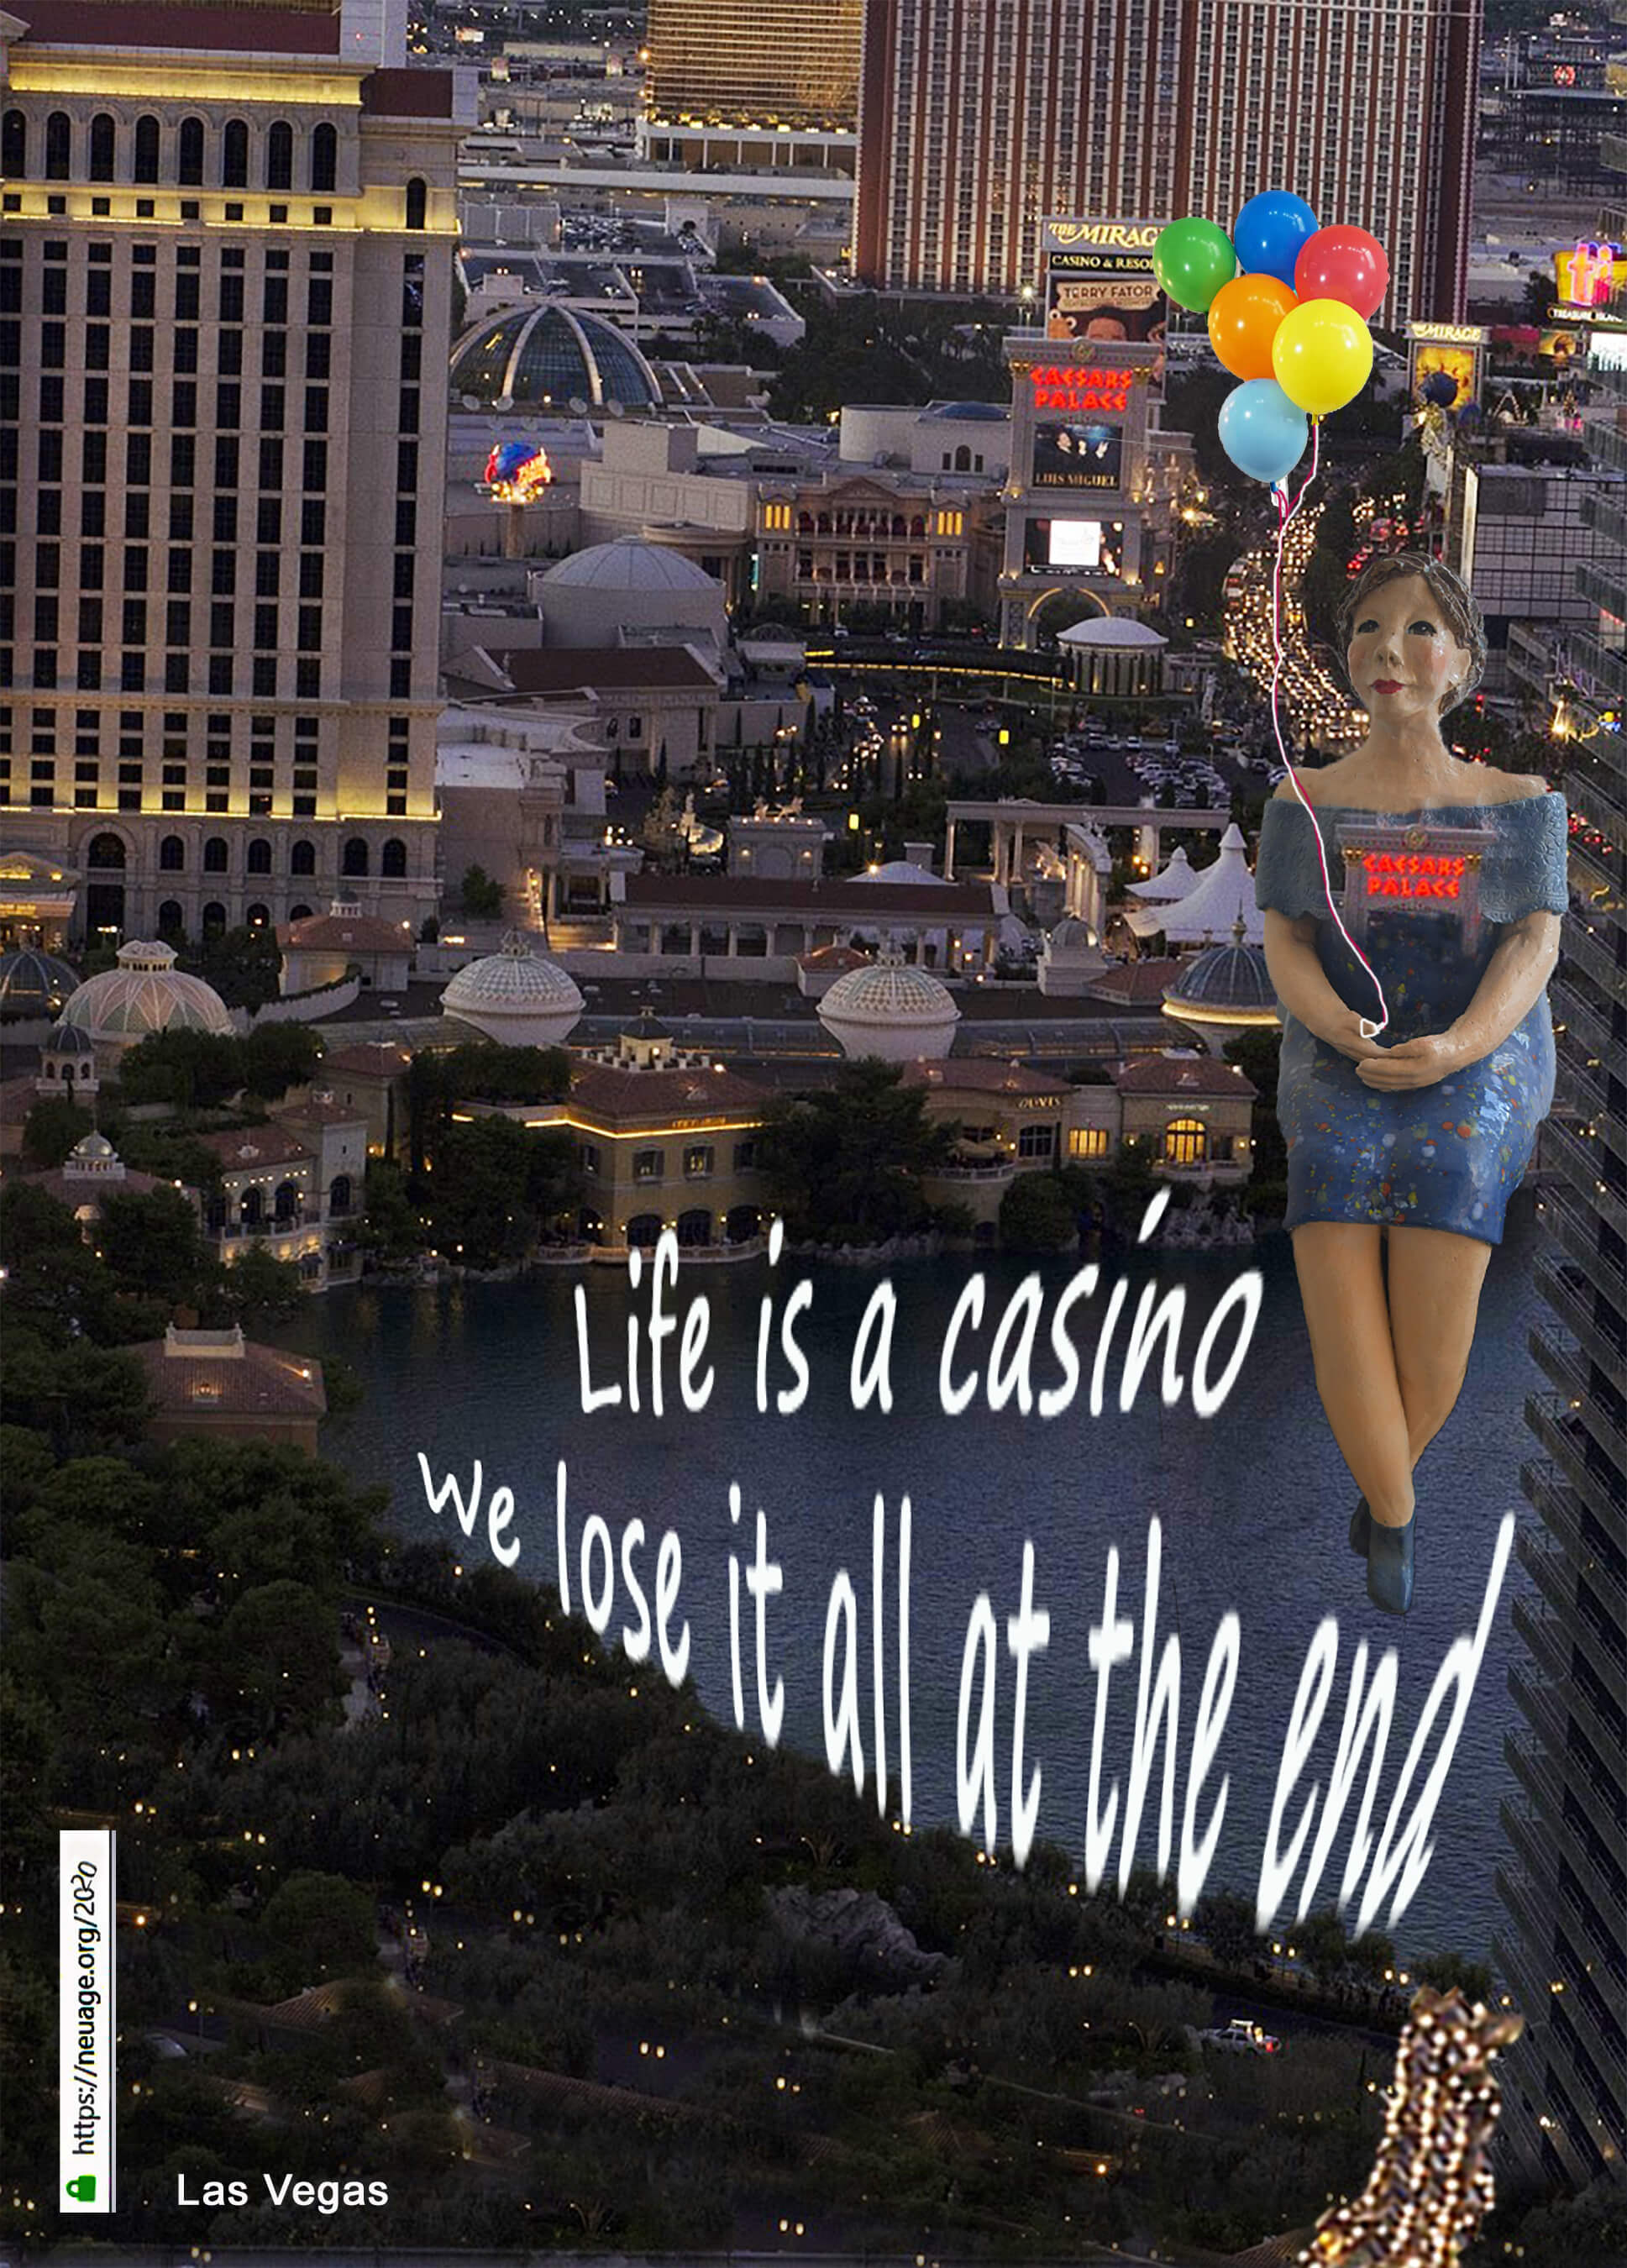 Life is a casino

We lose it all at the end

23 April 2020 Vista, South Australia